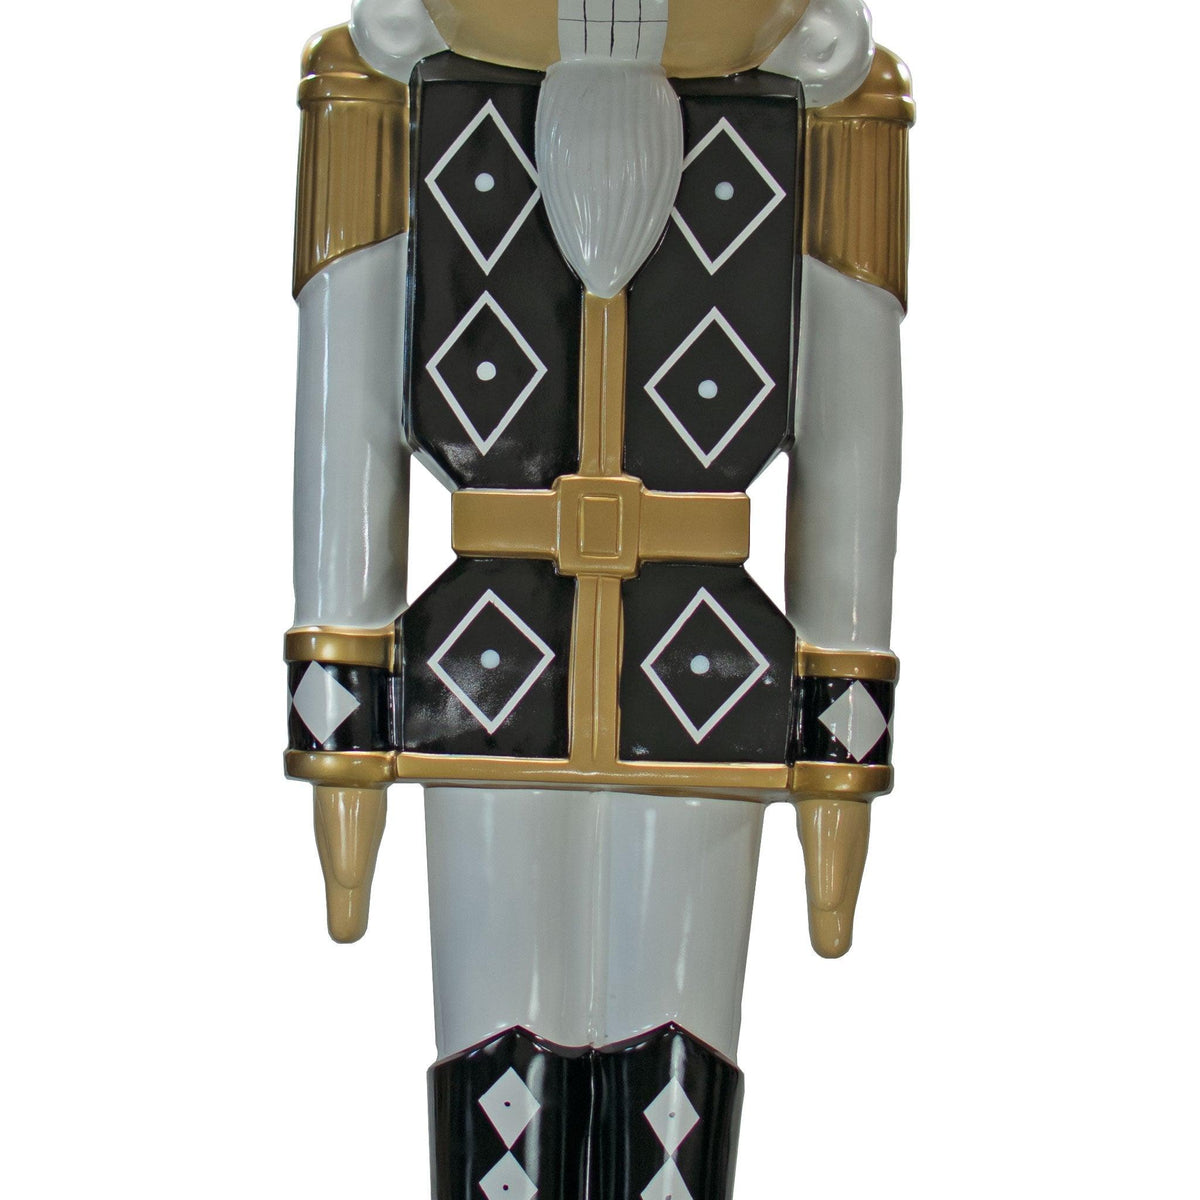 Black and White 12FT Fiberglass Nutcrackers for sale for purchase and rental from leedisplay.com.  Shop now